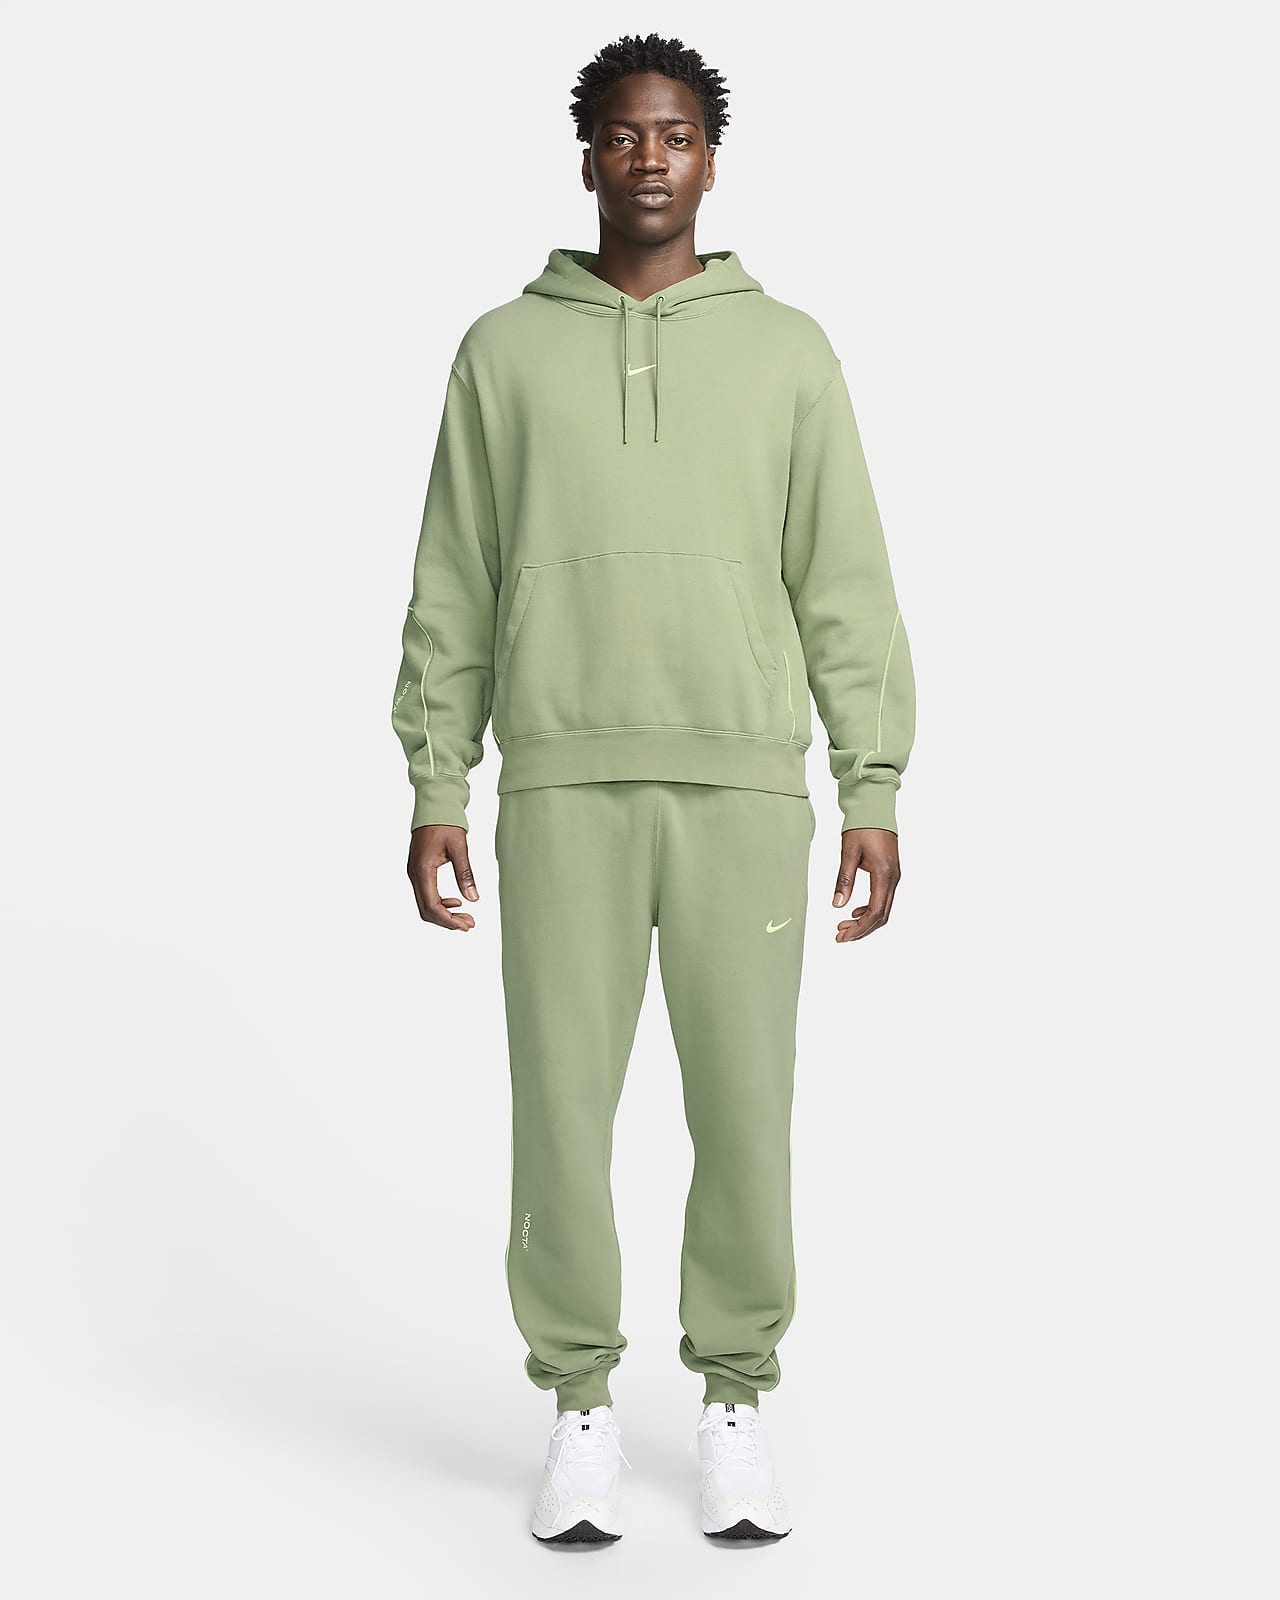 Nike x Drake Nocta Pants Fleece grey for man - Pants  Holypopstore -  Retail innovators to fuel the culture of sneakers